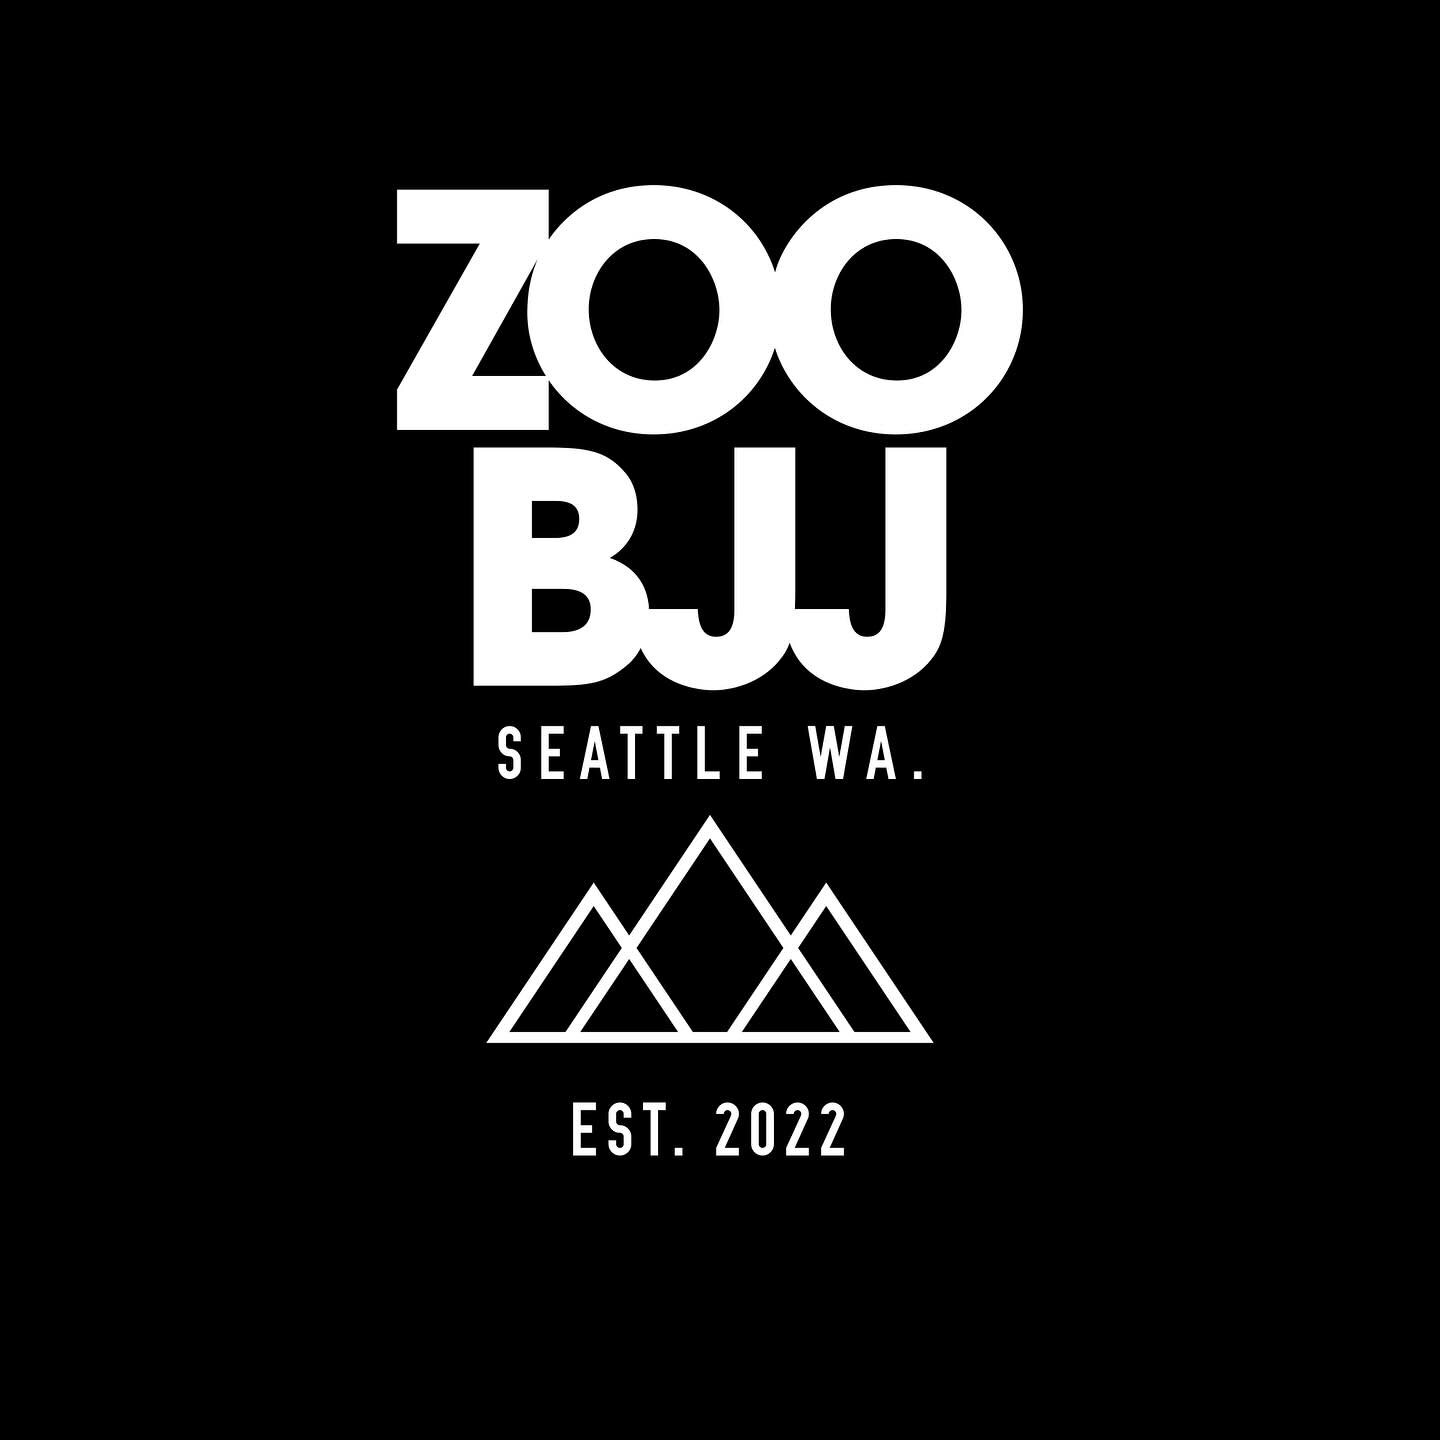 It was a fantastic 1st year @zoobjjsea!!! Feeling extremely fortunate for the support and camaraderie of such a great group of people. Super excited for an even better 2024. Merry Xmas and Happy Holidays to All 🌲🥋